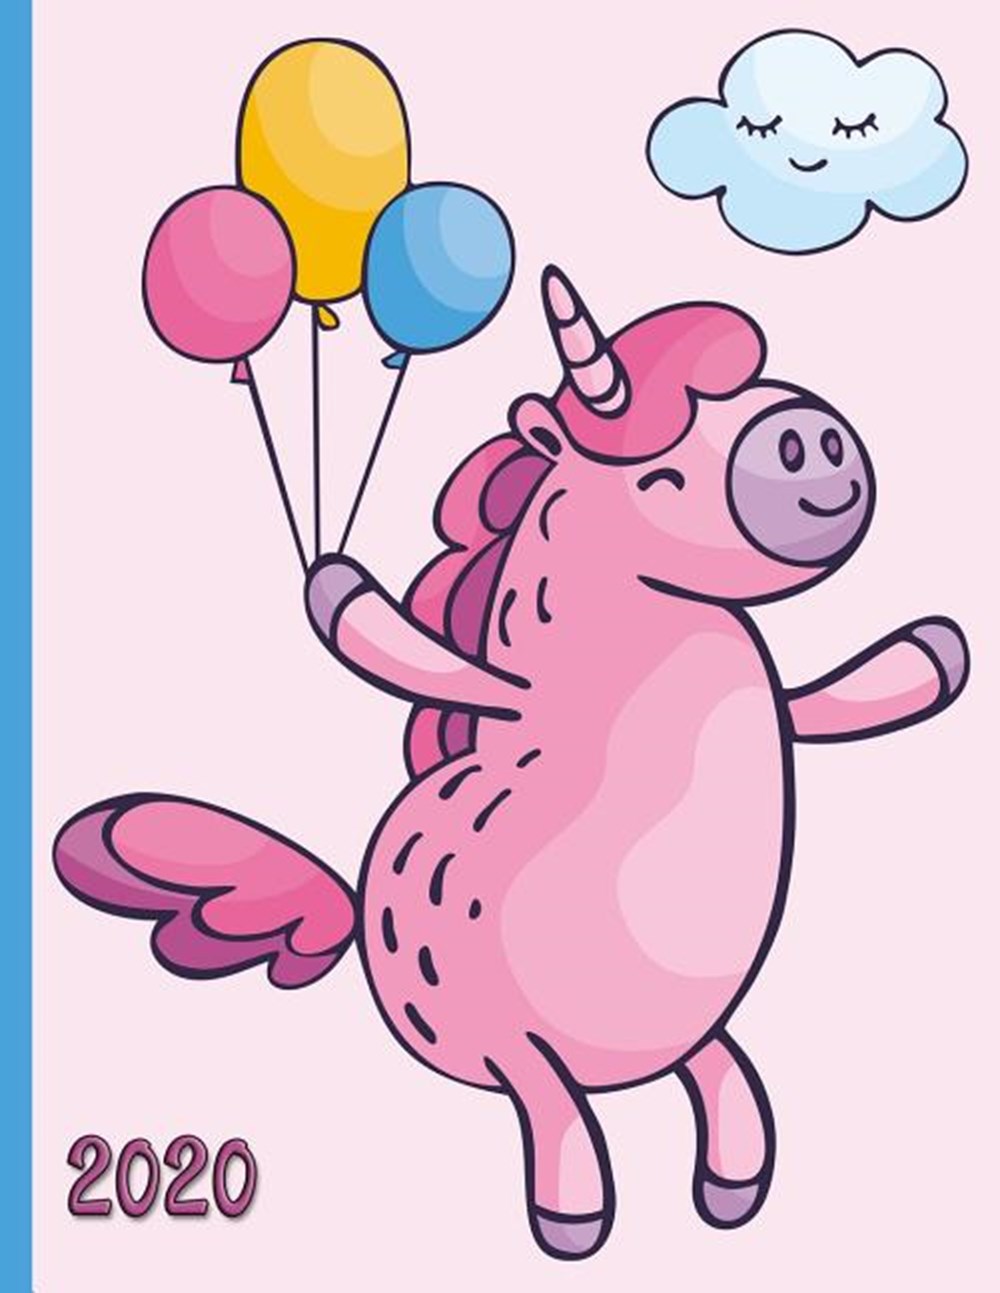 Dancing Unicorn at a Party with Balloons 2020 Schedule Planner and Organizer / Weekly Calendar